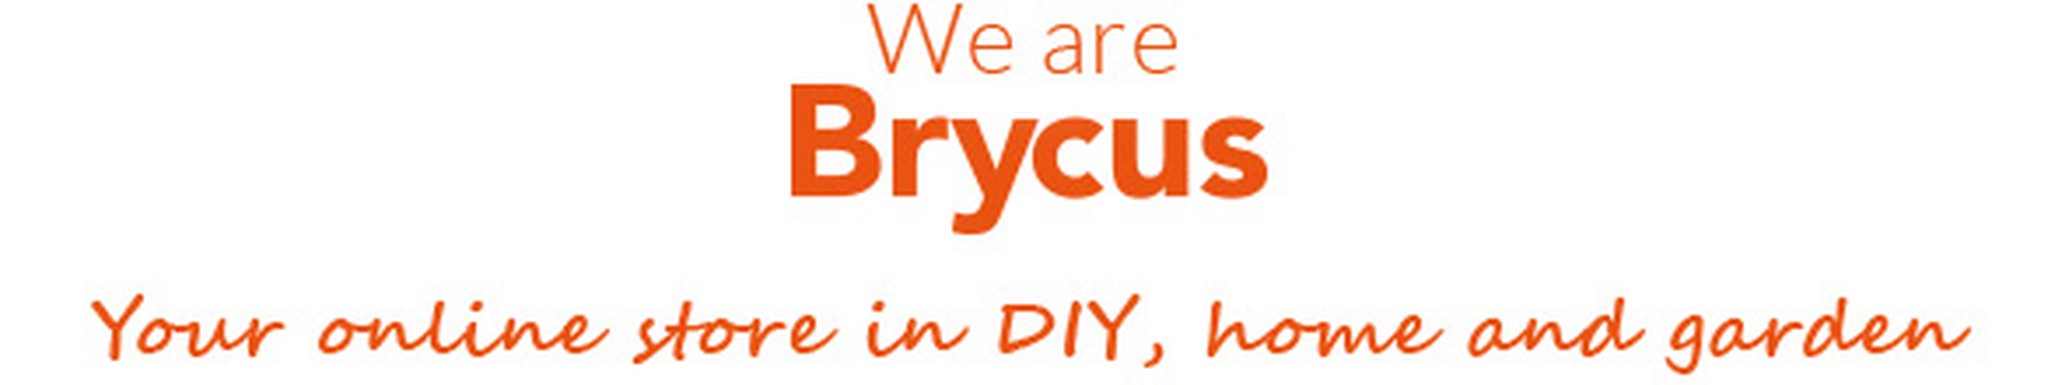 We are Brycus, your DIY, Home and Garden online store